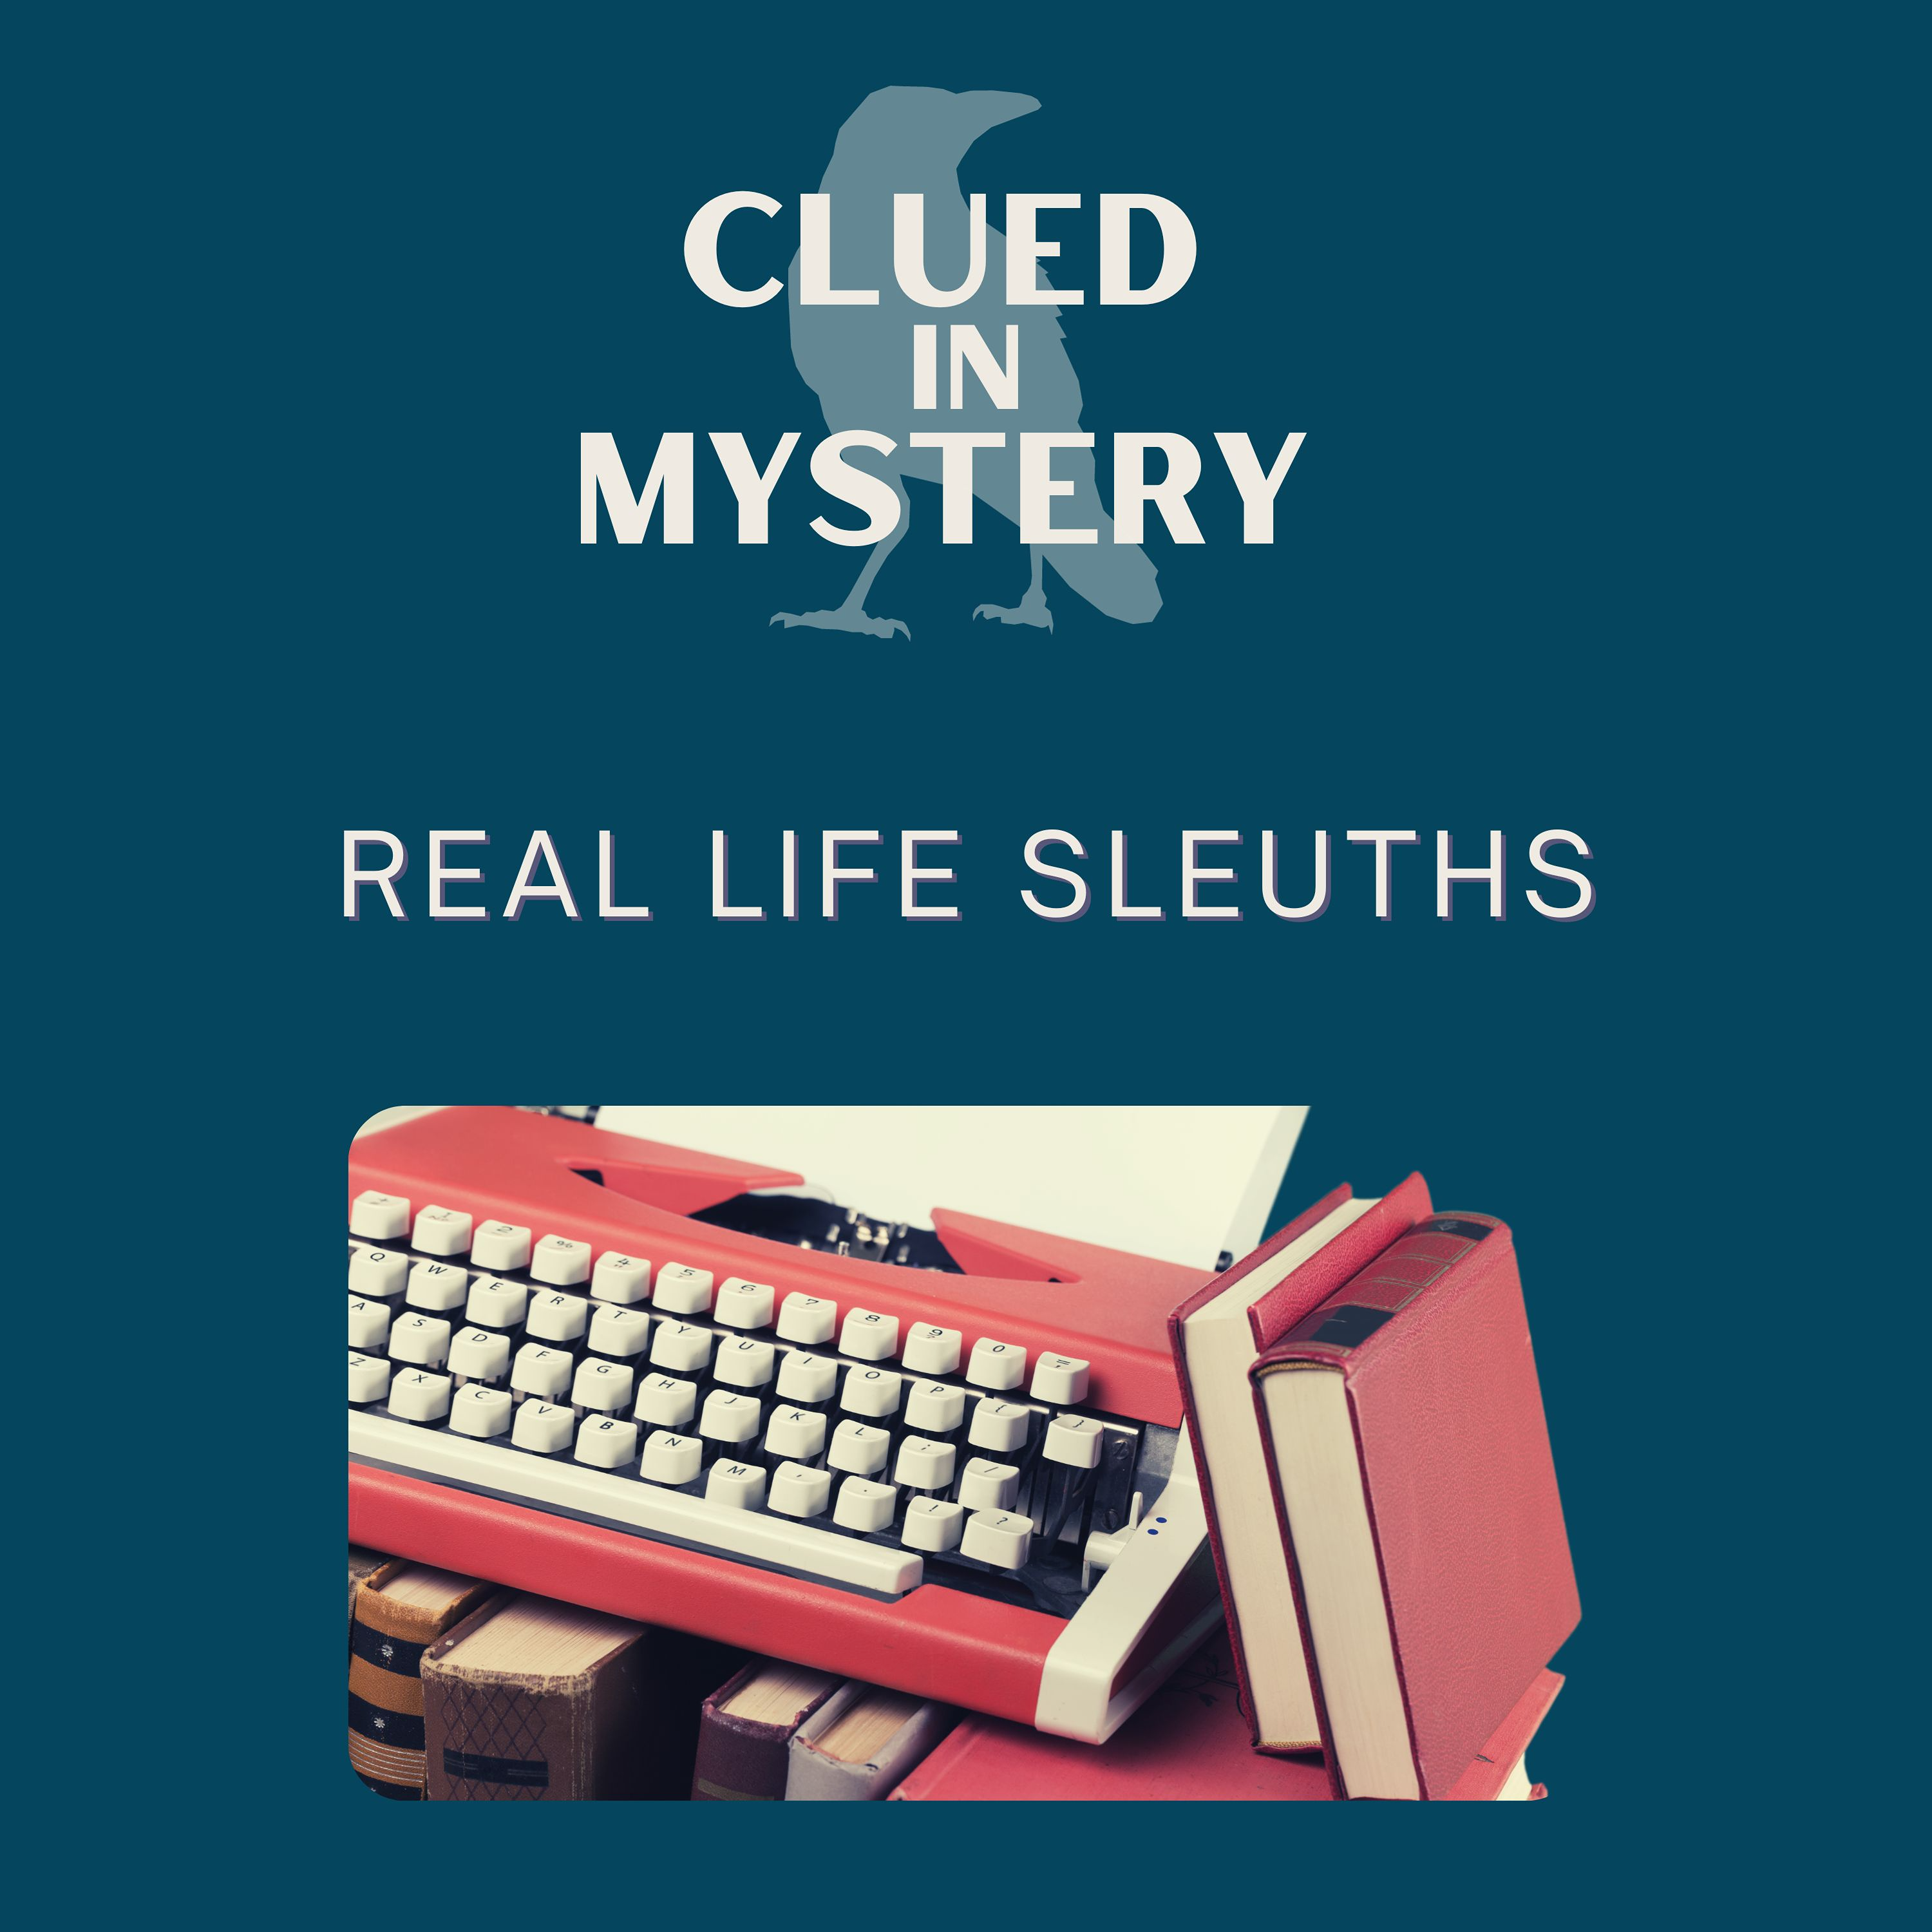 Real life amateur sleuths